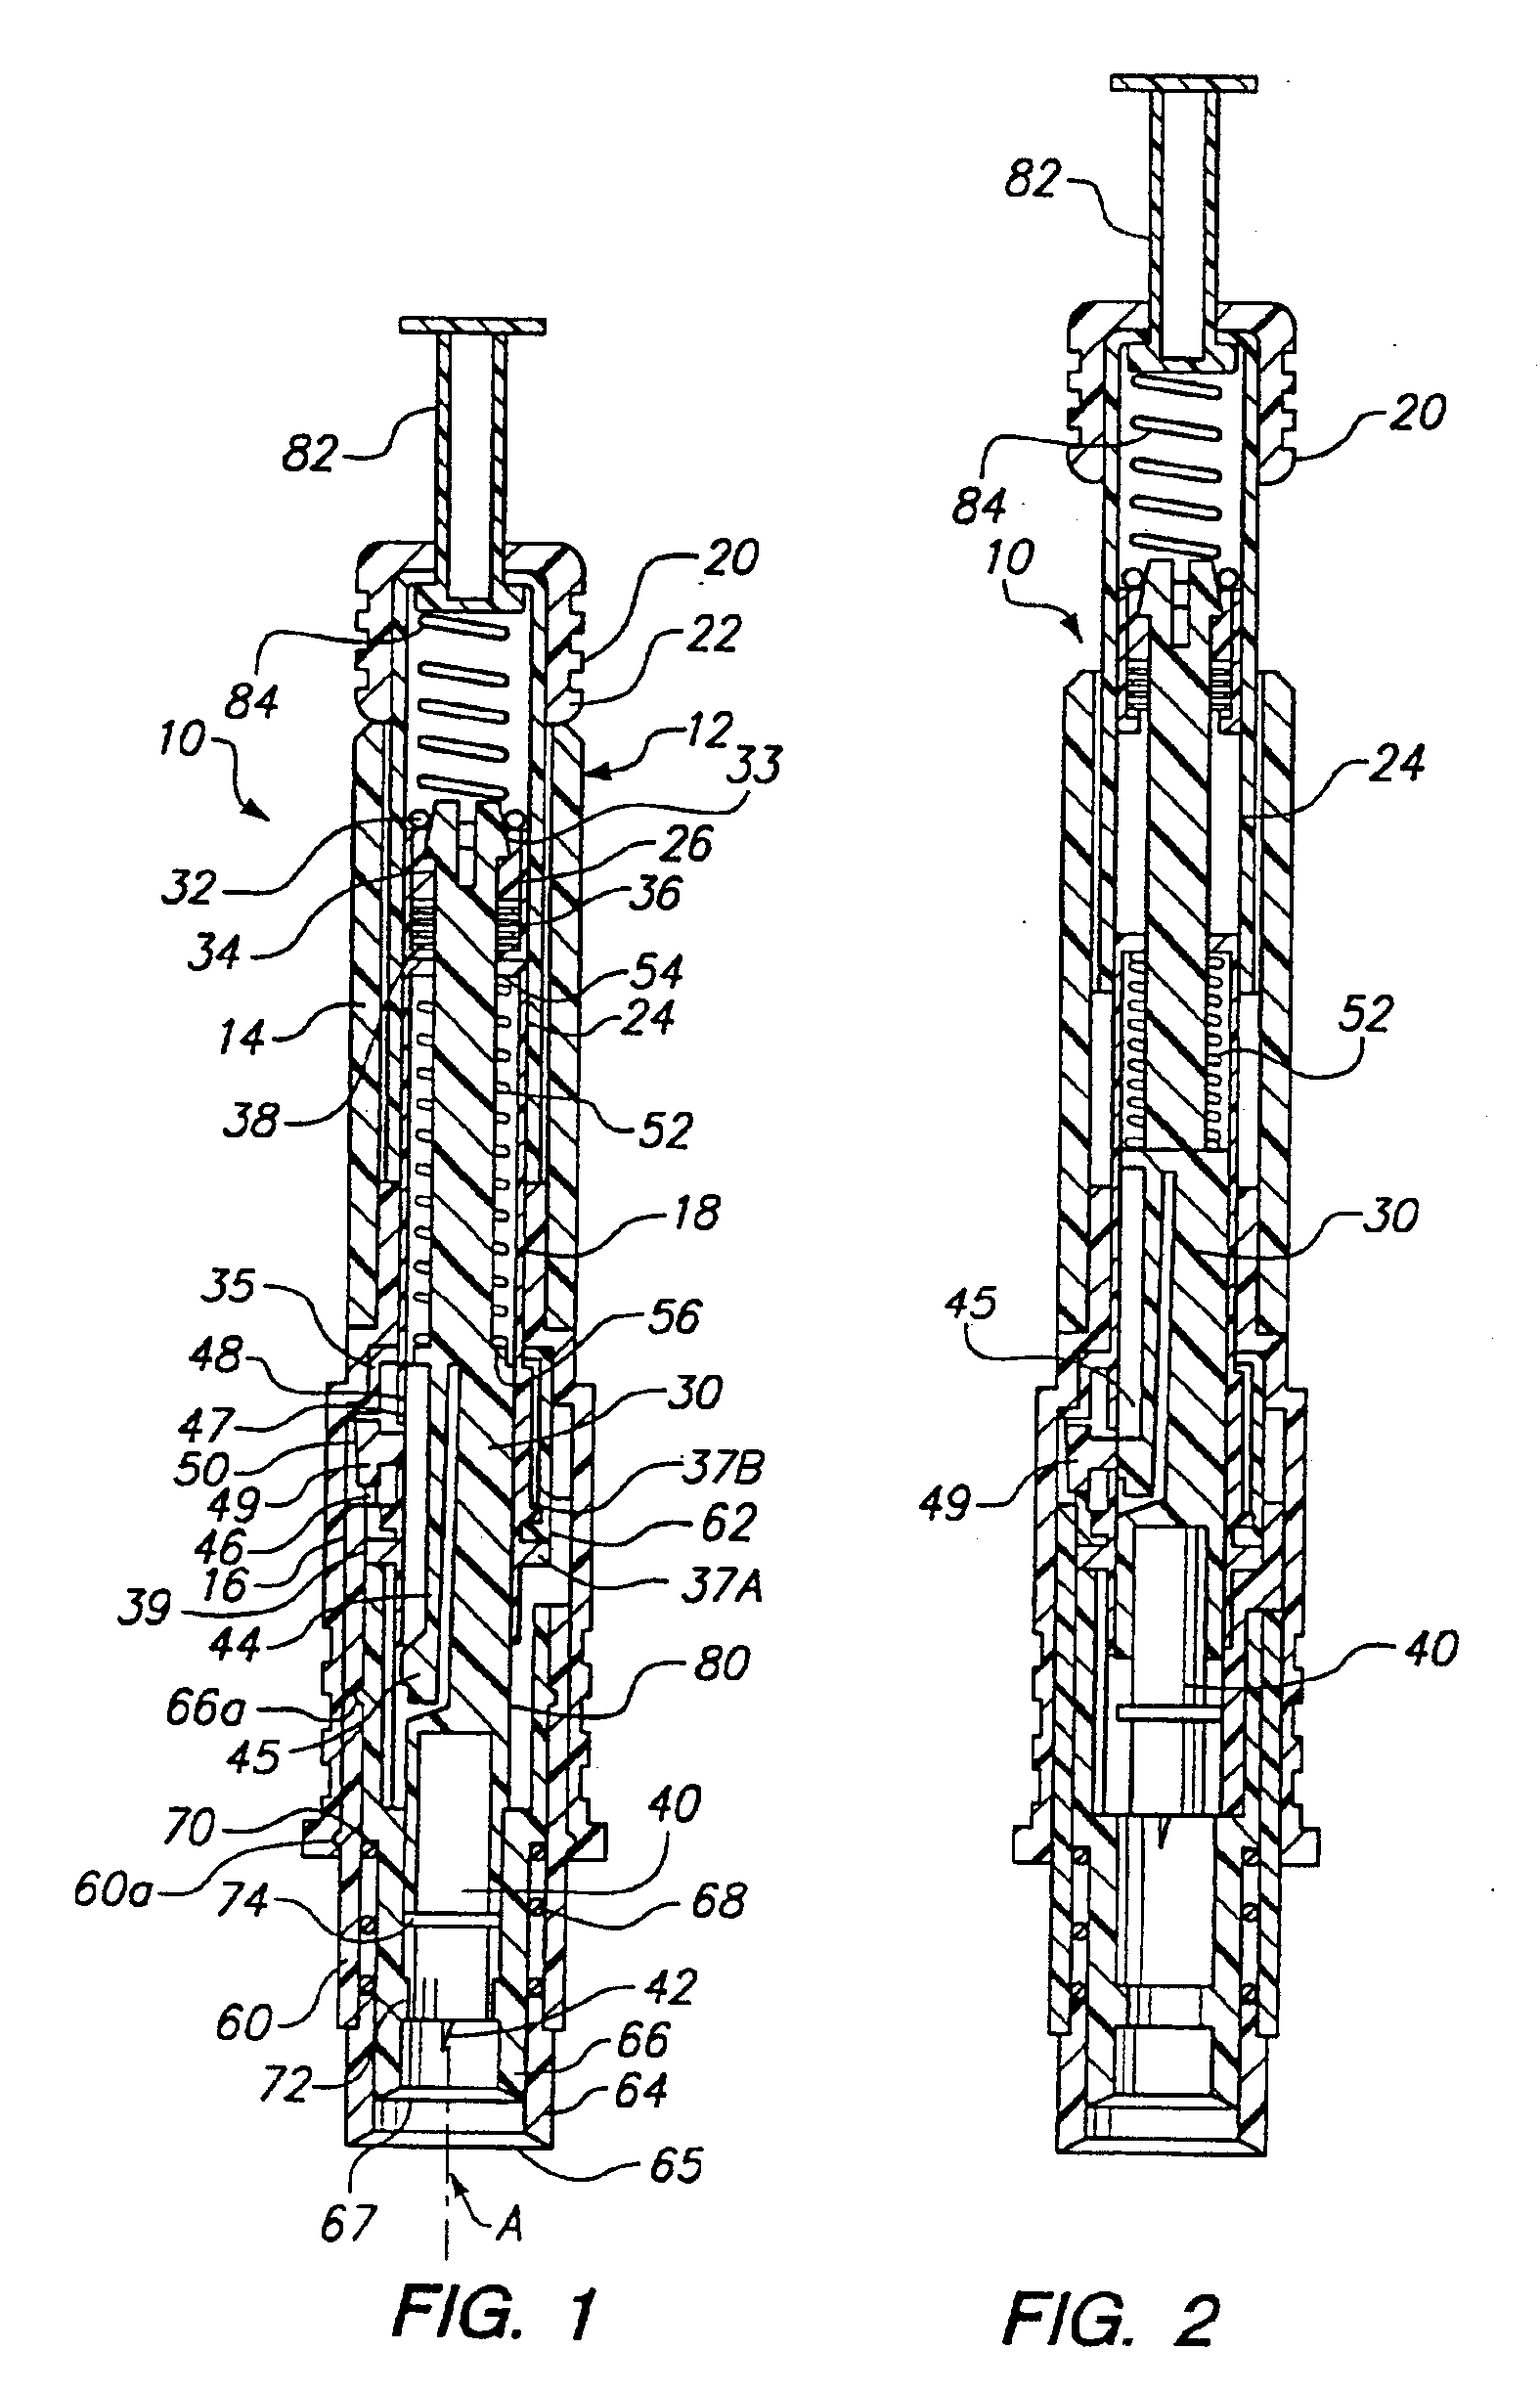 Methods and apparatus for suctioning and pumping body fluid from an incision